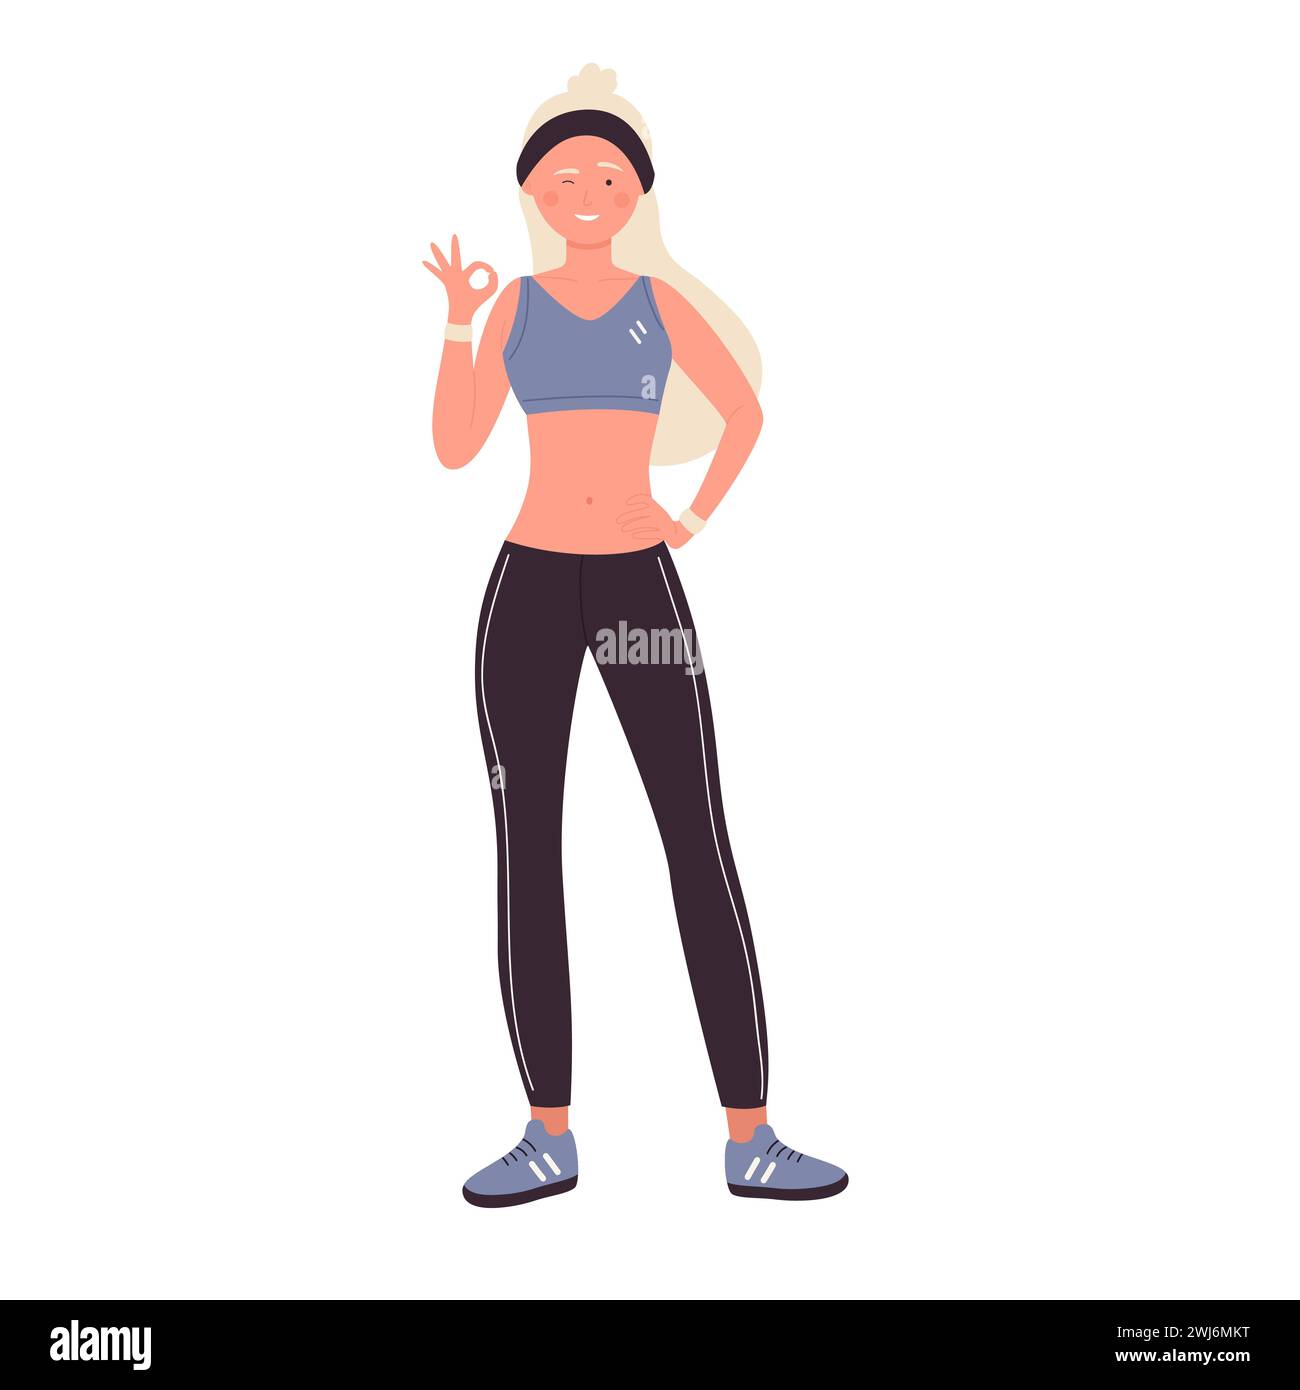 Personal trainer dumbbell Stock Vector Images - Page 3 - Alamy